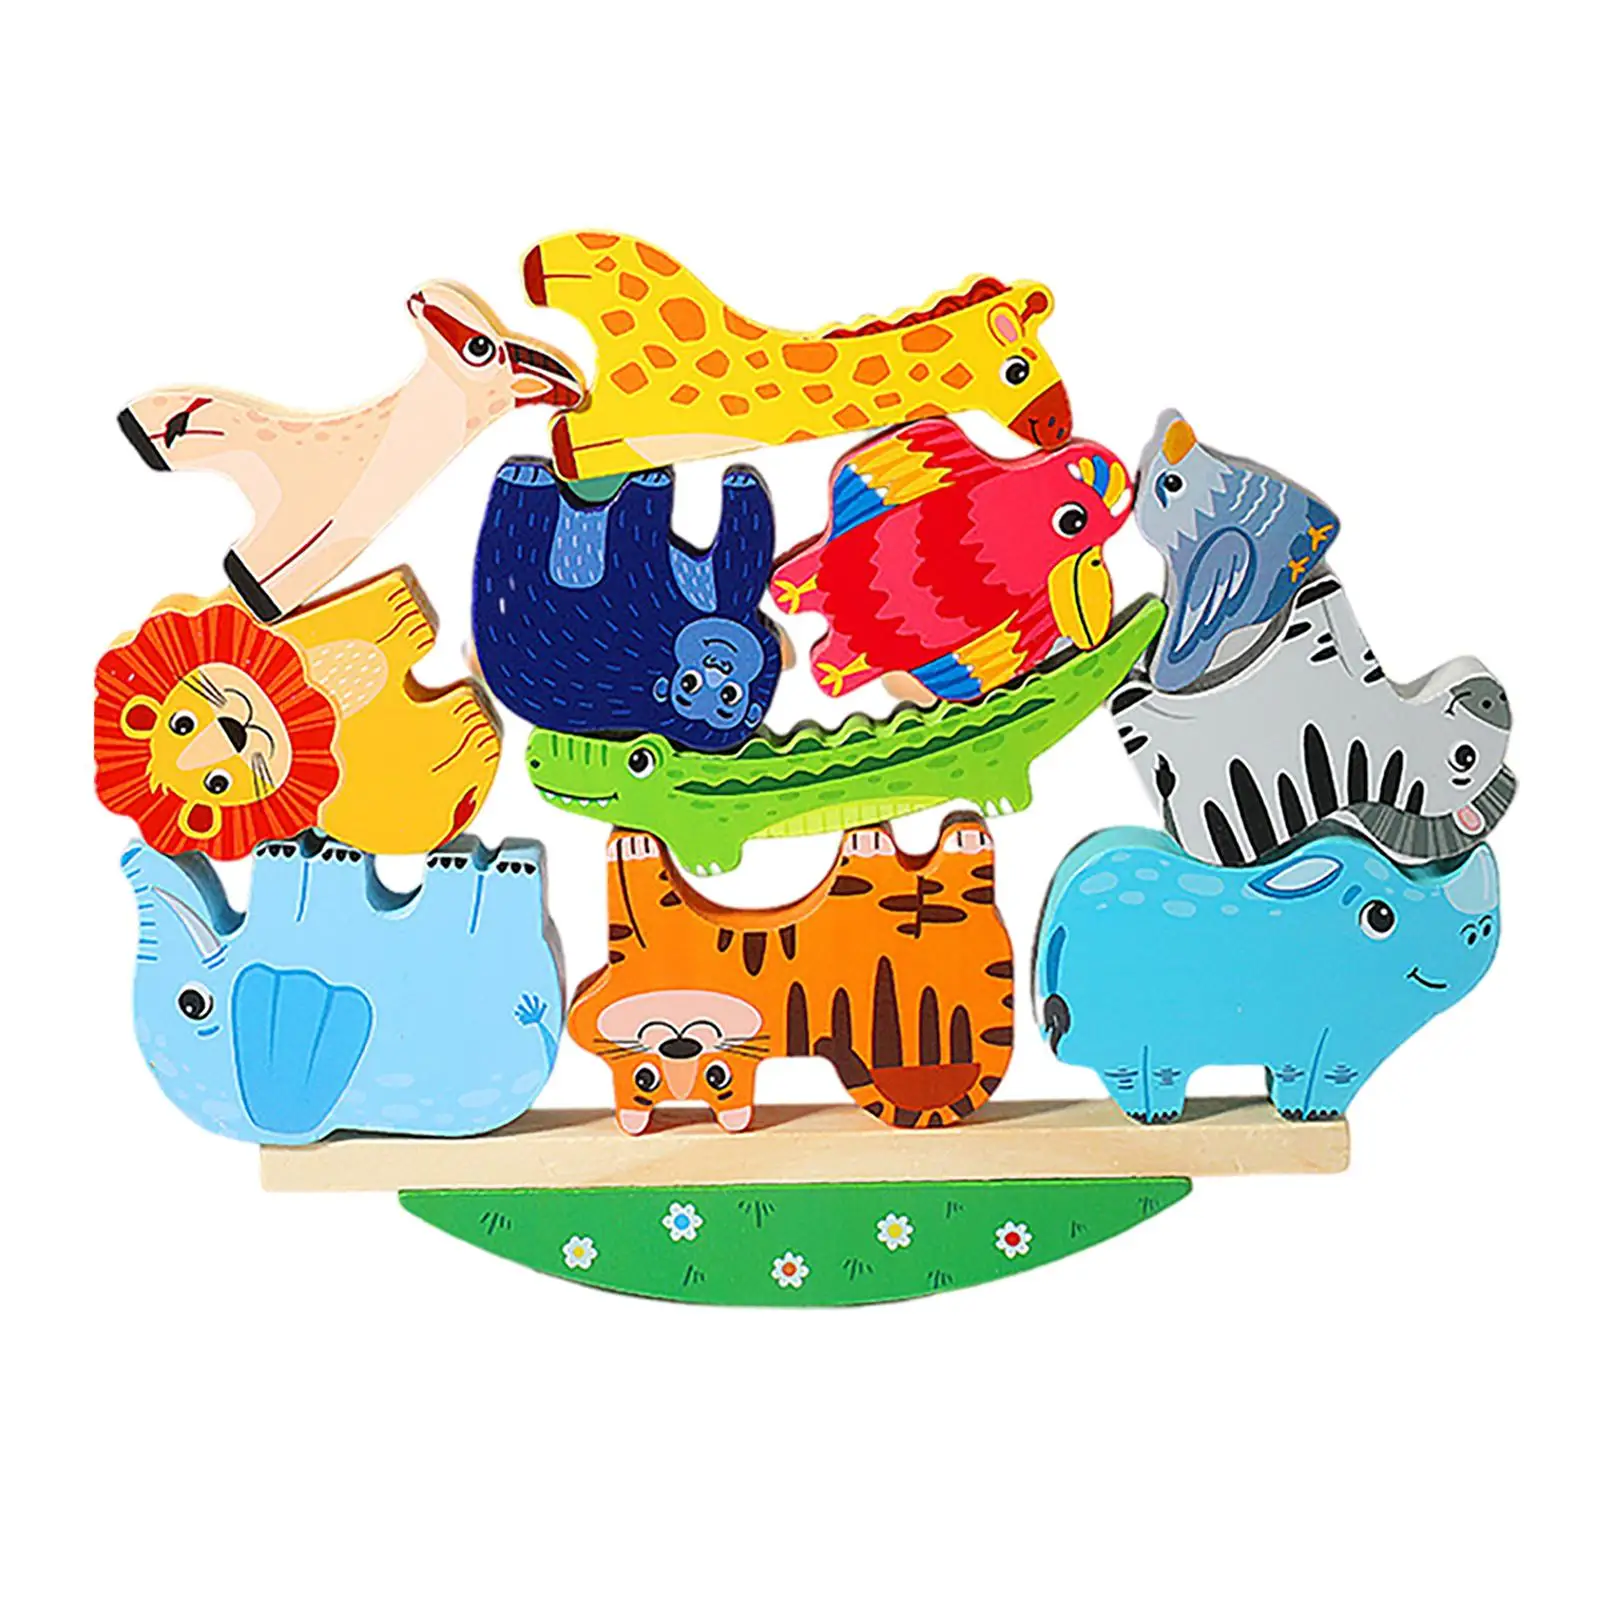 Stacking Baby Stacking Toys, Preschool Learning Toys  Stacking Toys Balance Training Toy for Children Kids Boys Birthday Gifts